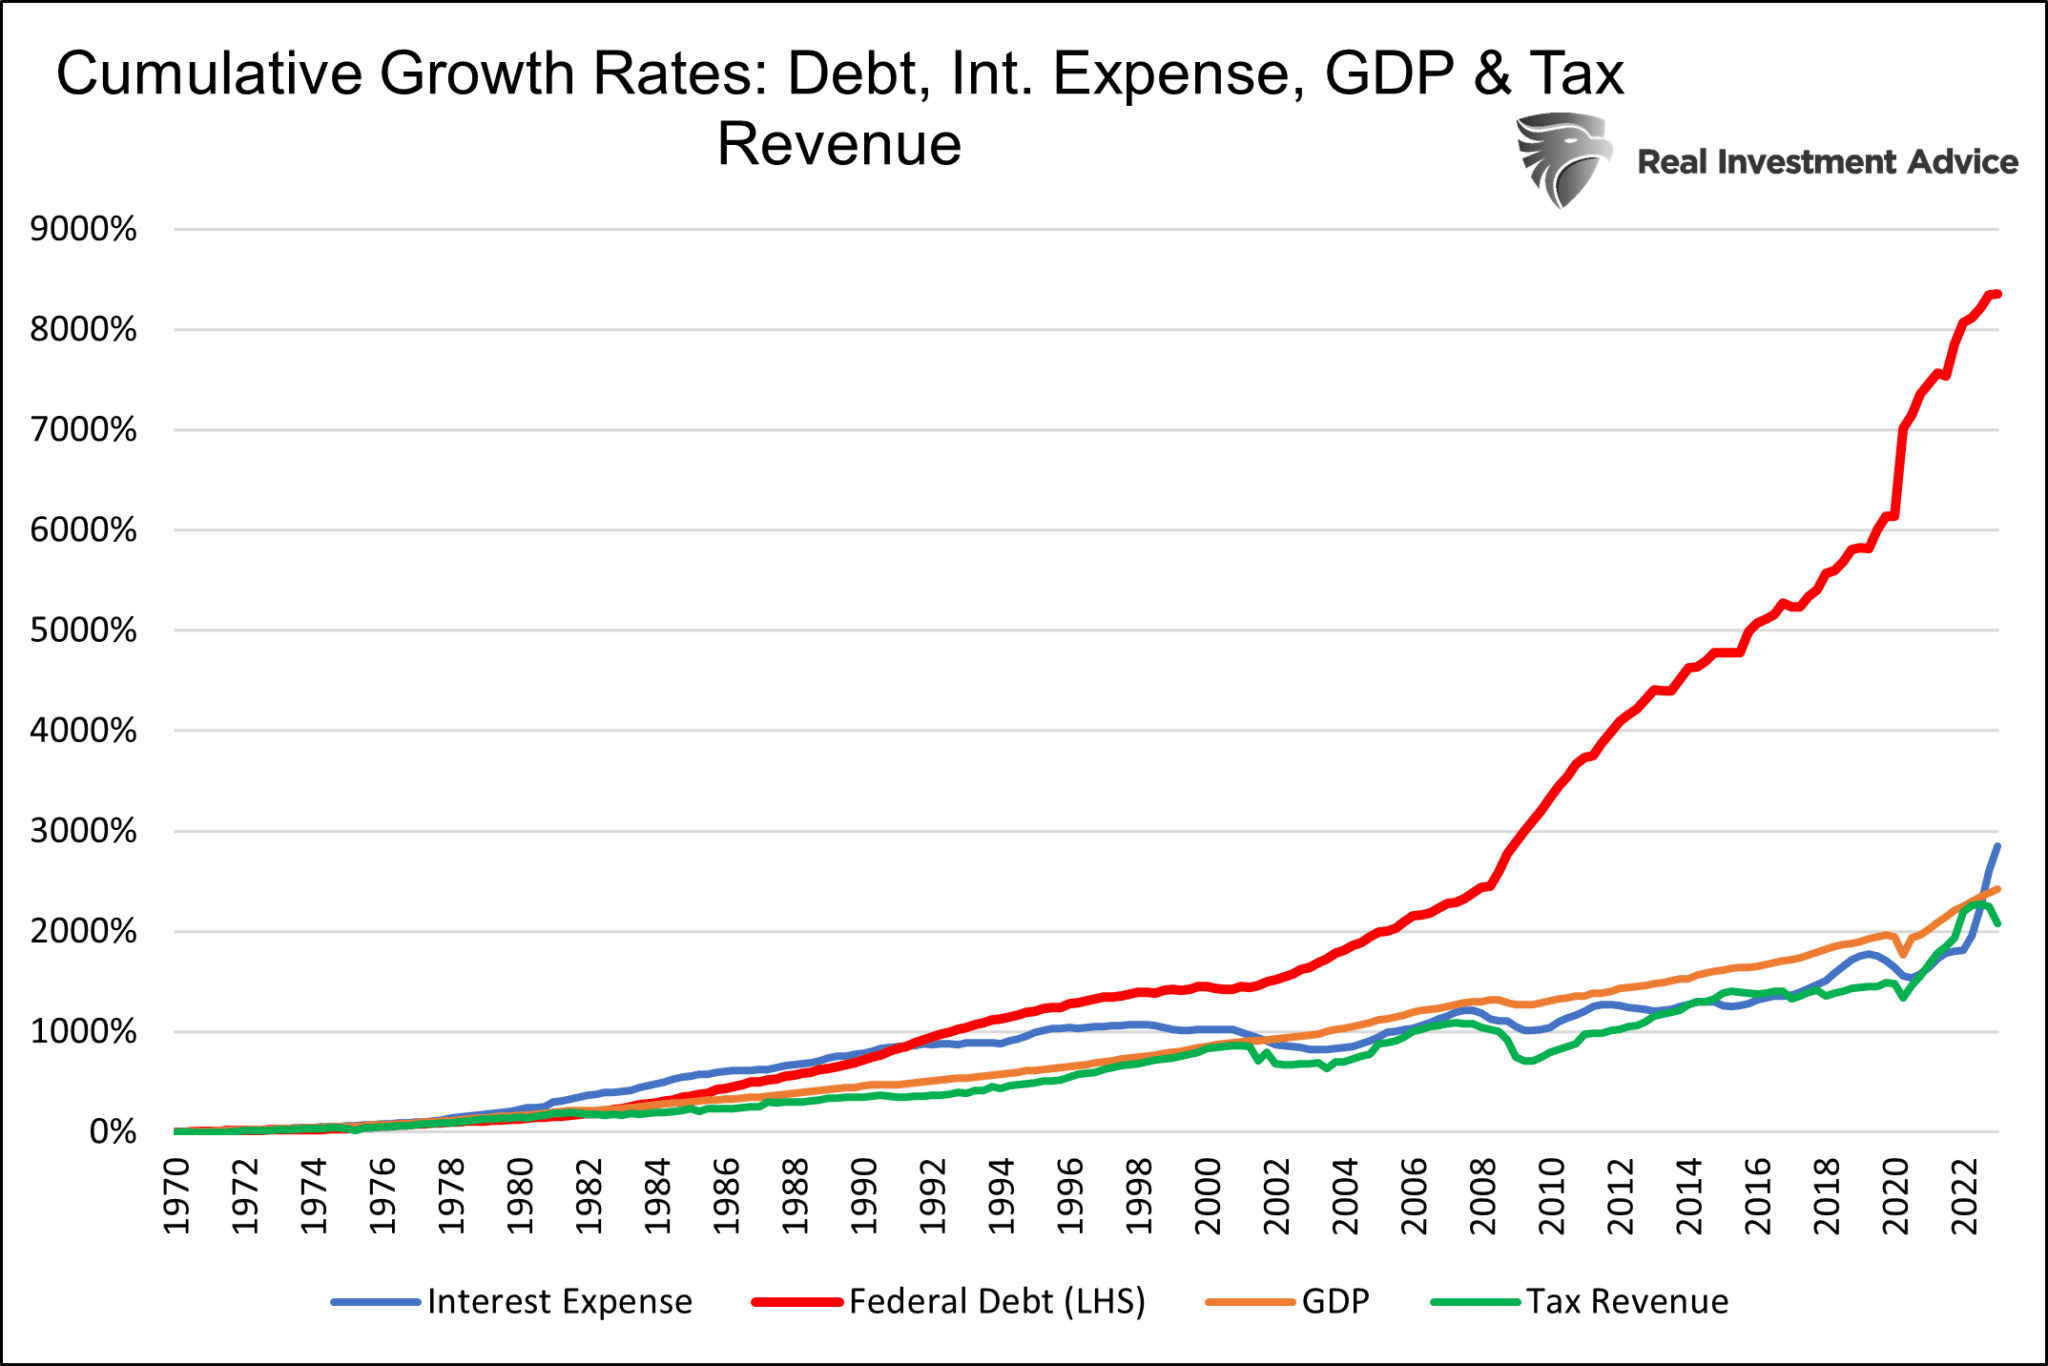 Growth Rate, Debt and GDP